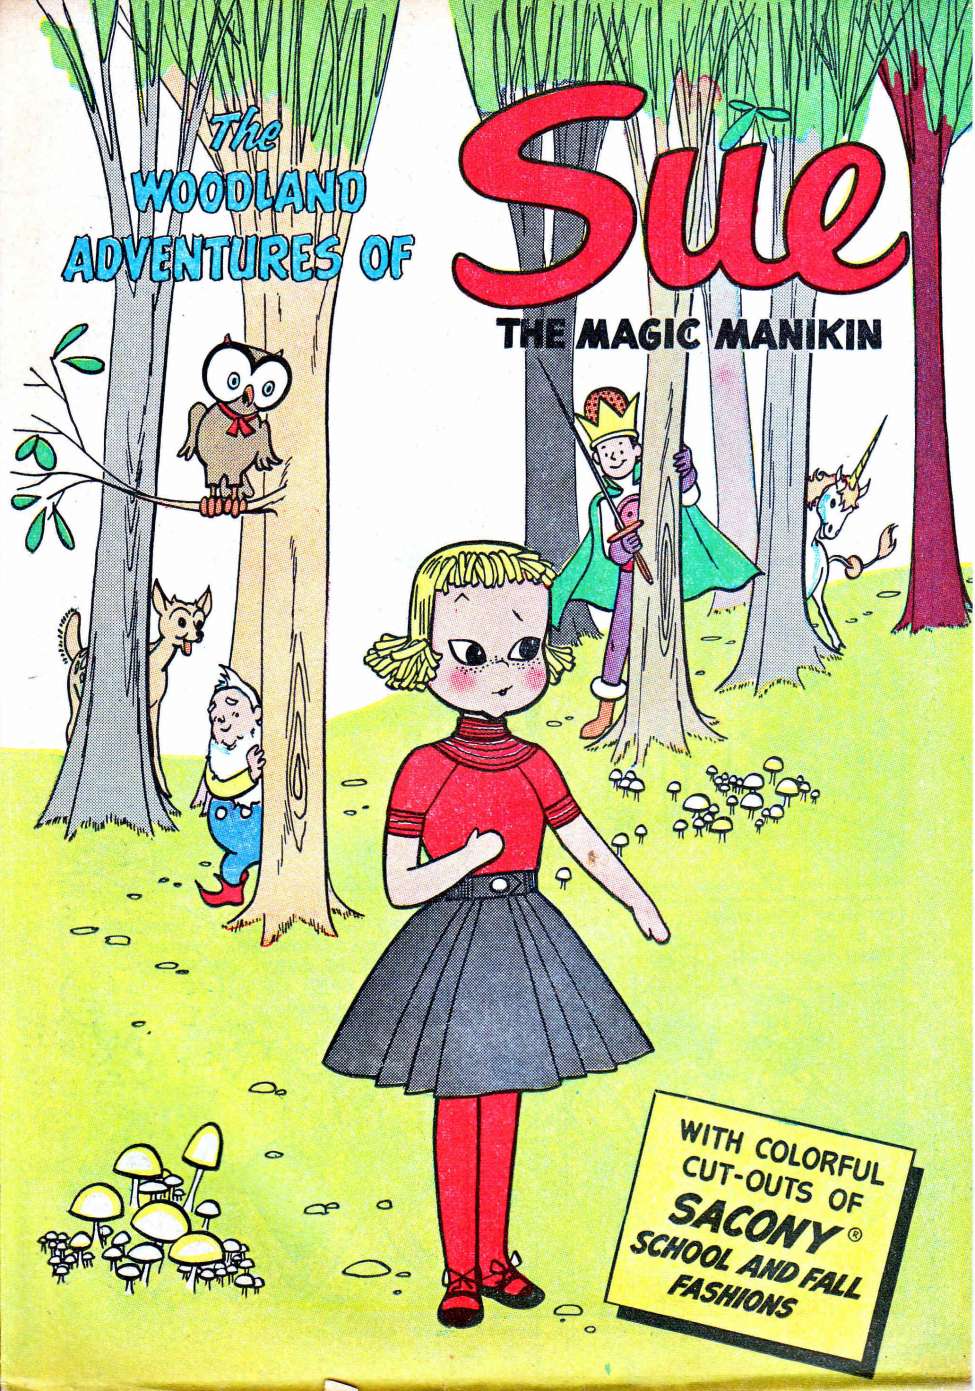 Book Cover For The Woodland Adventures Of Sue The Magic Manikin